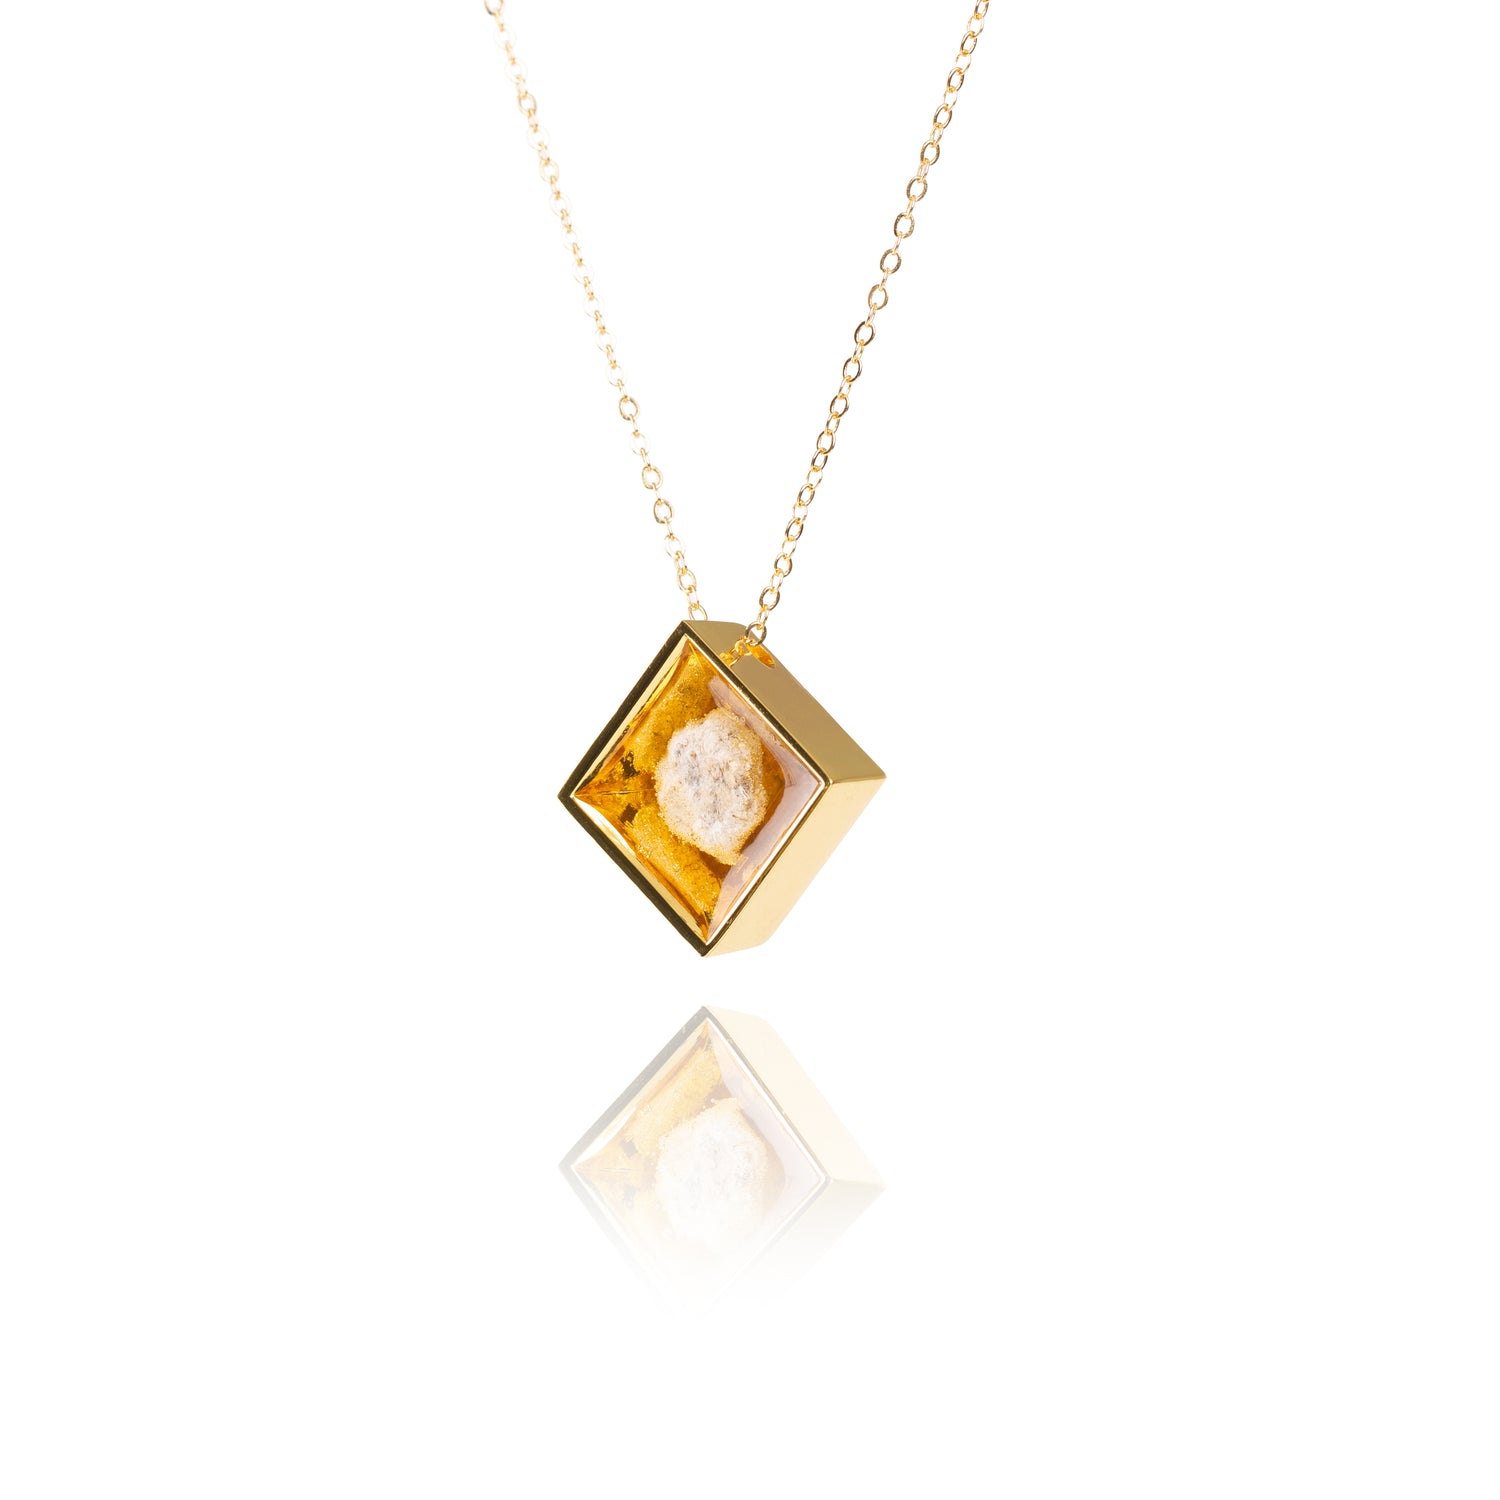 A side view of a small natural tan stone sitting in the middle of a diamond shaped metal pendant in a gold color. The pendant is hanging on a gold chain.